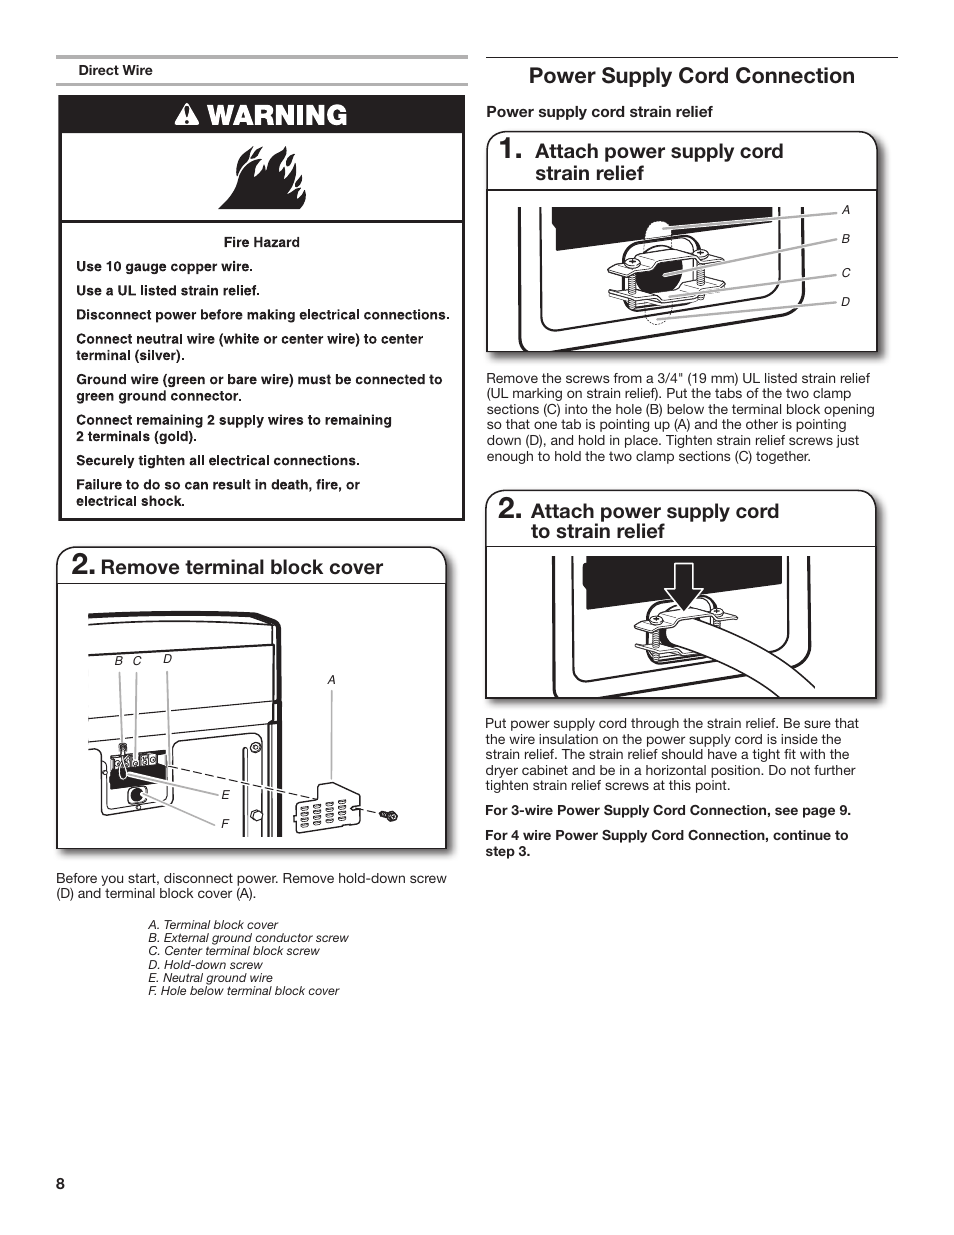 Power supply cord connection, Remove terminal block cover, Attach power supply cord to strain relief | Attach power supply cord strain relief | Maytag WED4890BQ Installation User Manual | Page 8 / 20